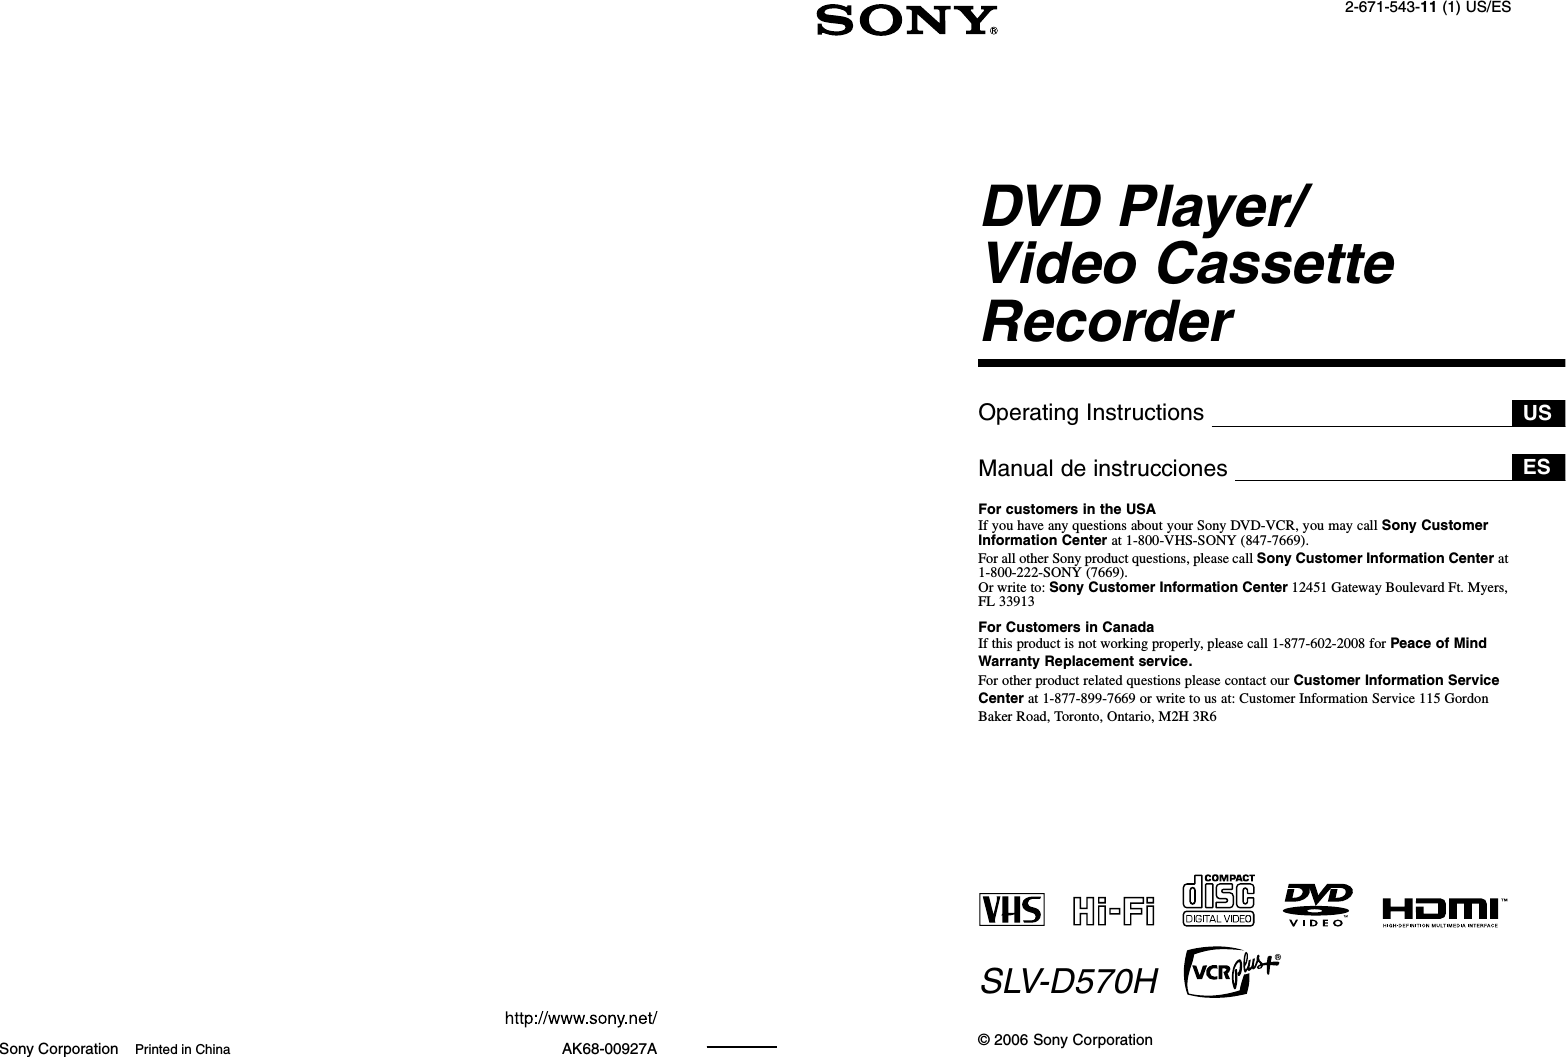 Sony Corporation Printed in China AK68-00927A2-671-543-11 (1) US/ESDVD Player/Video Cassette RecorderOperating InstructionsManual de instruccionesFor customers in the USAIf you have any questions about your Sony DVD-VCR, you may call Sony Customer Information Center at 1-800-VHS-SONY (847-7669).For all other Sony product questions, please call Sony Customer Information Center at 1-800-222-SONY (7669). Or write to: Sony Customer Information Center 12451 Gateway Boulevard Ft. Myers, FL 33913For Customers in CanadaIf this product is not working properly, please call 1-877-602-2008 for Peace of Mind Warranty Replacement service.For other product related questions please contact our Customer Information Service Center at 1-877-899-7669 or write to us at: Customer Information Service 115 Gordon Baker Road, Toronto, Ontario, M2H 3R6SLV-D570H© 2006 Sony CorporationUSES